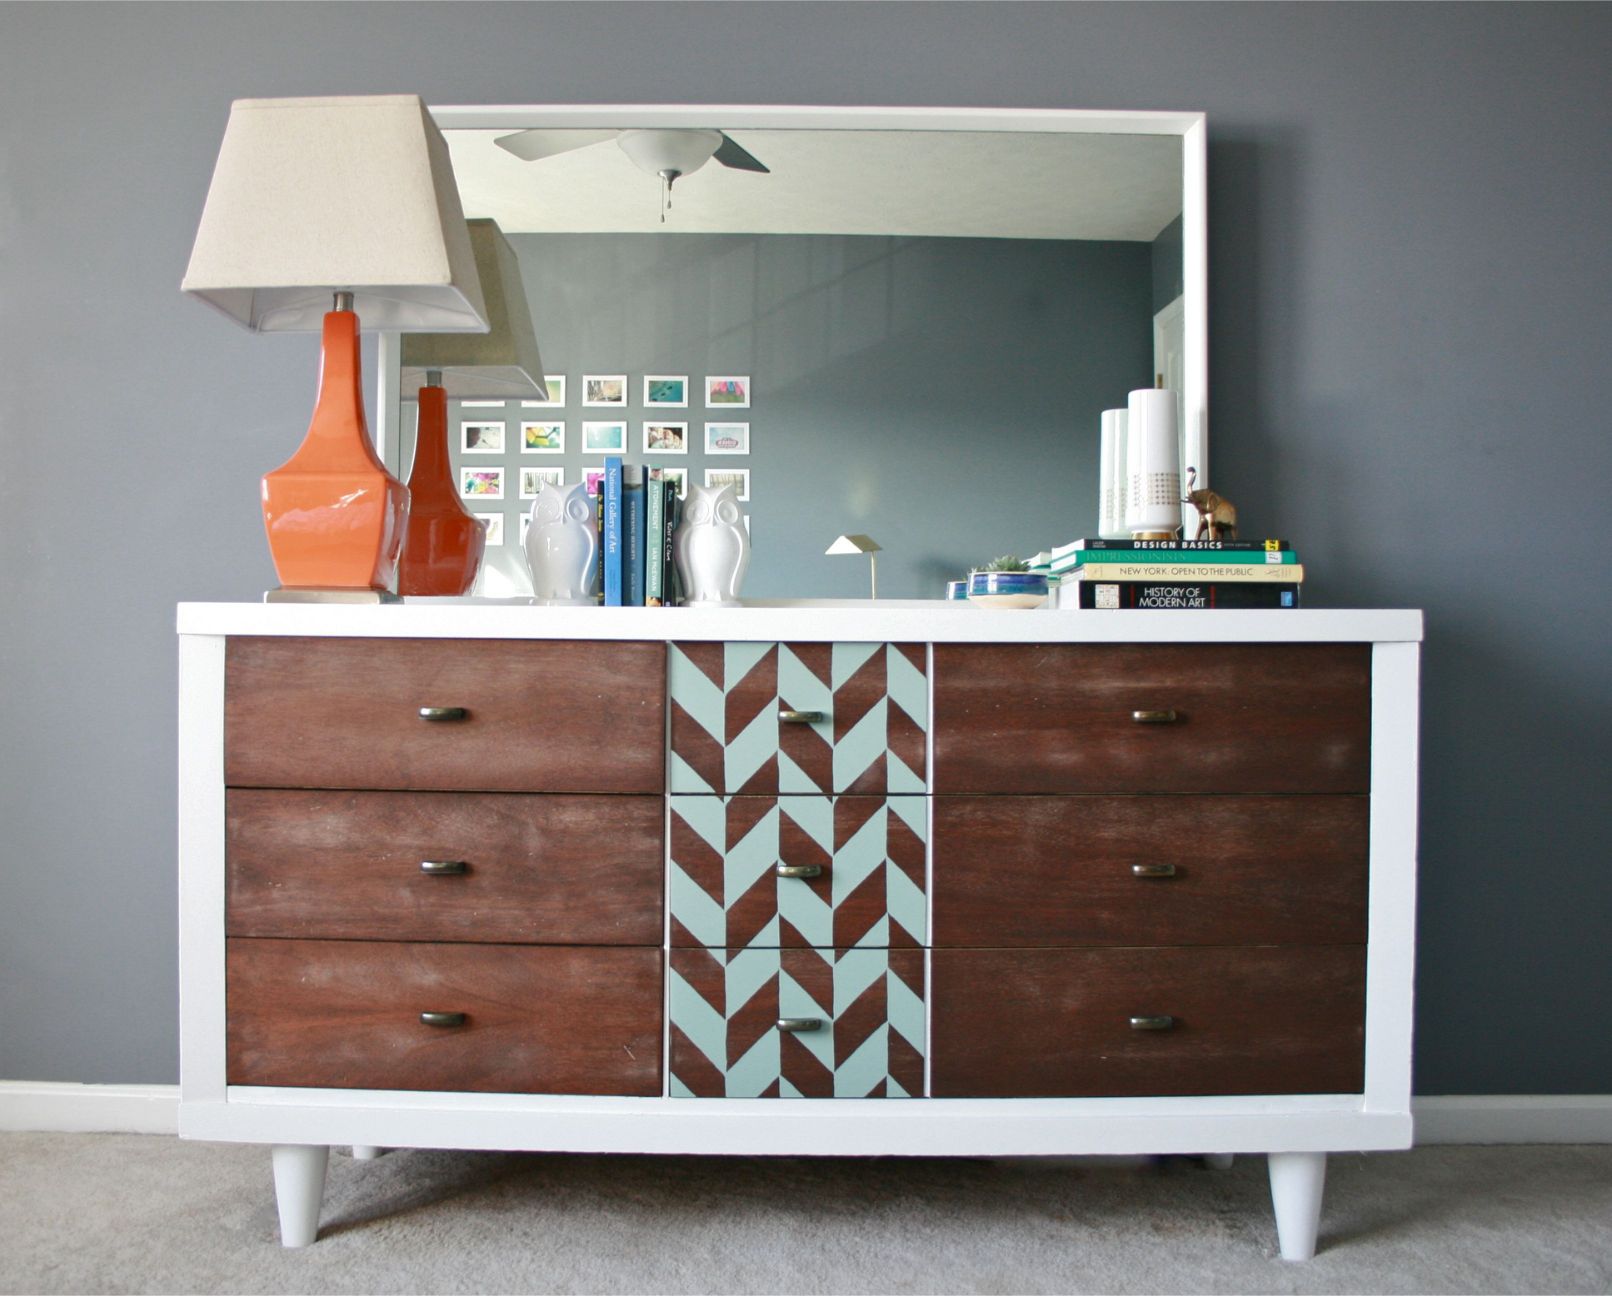 How To Make A Dresser Look Mid-Century